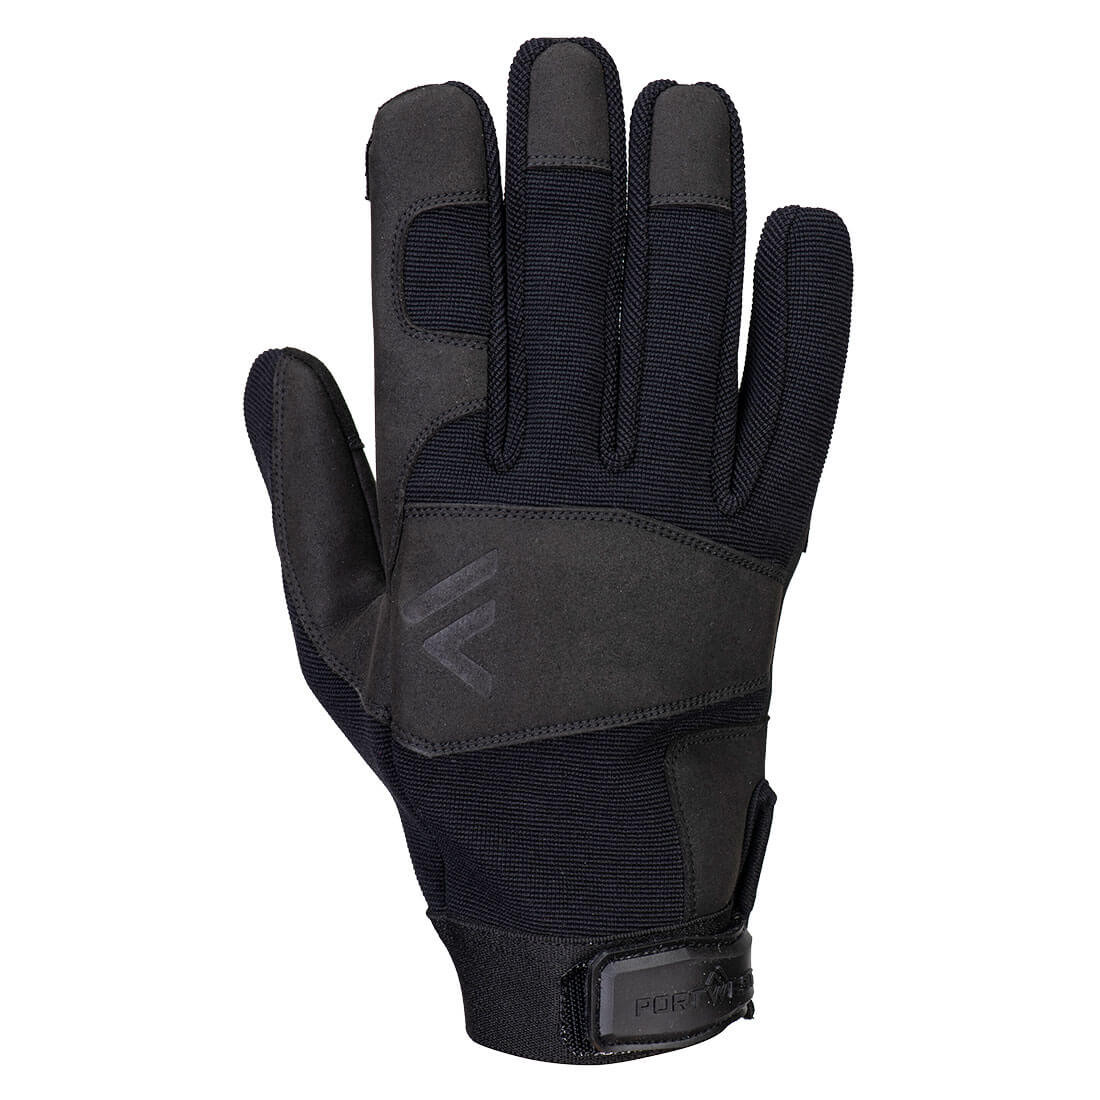 Pro Utility Glove - Personal protection